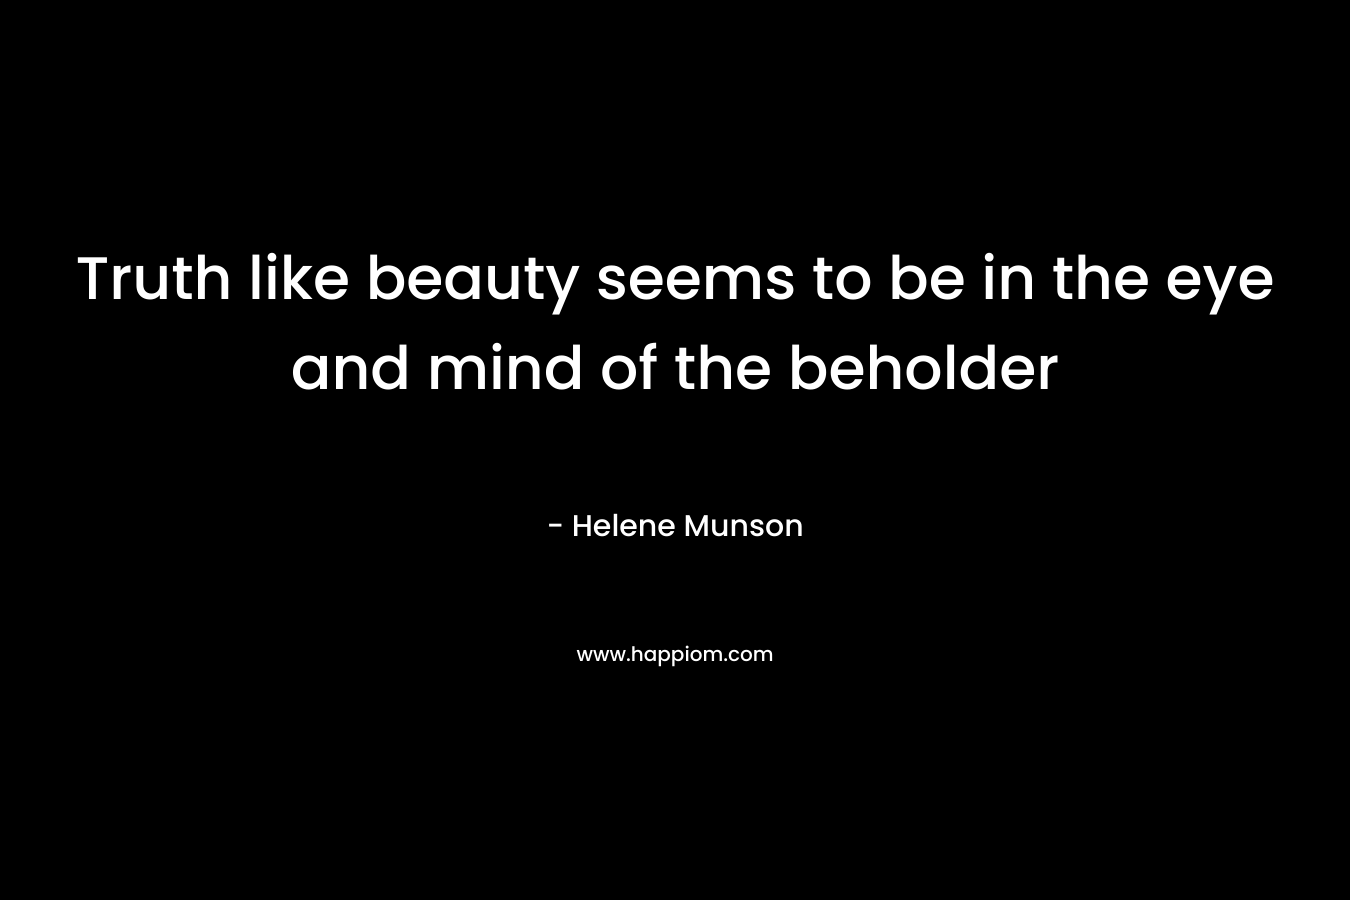 Truth like beauty seems to be in the eye and mind of the beholder – Helene Munson